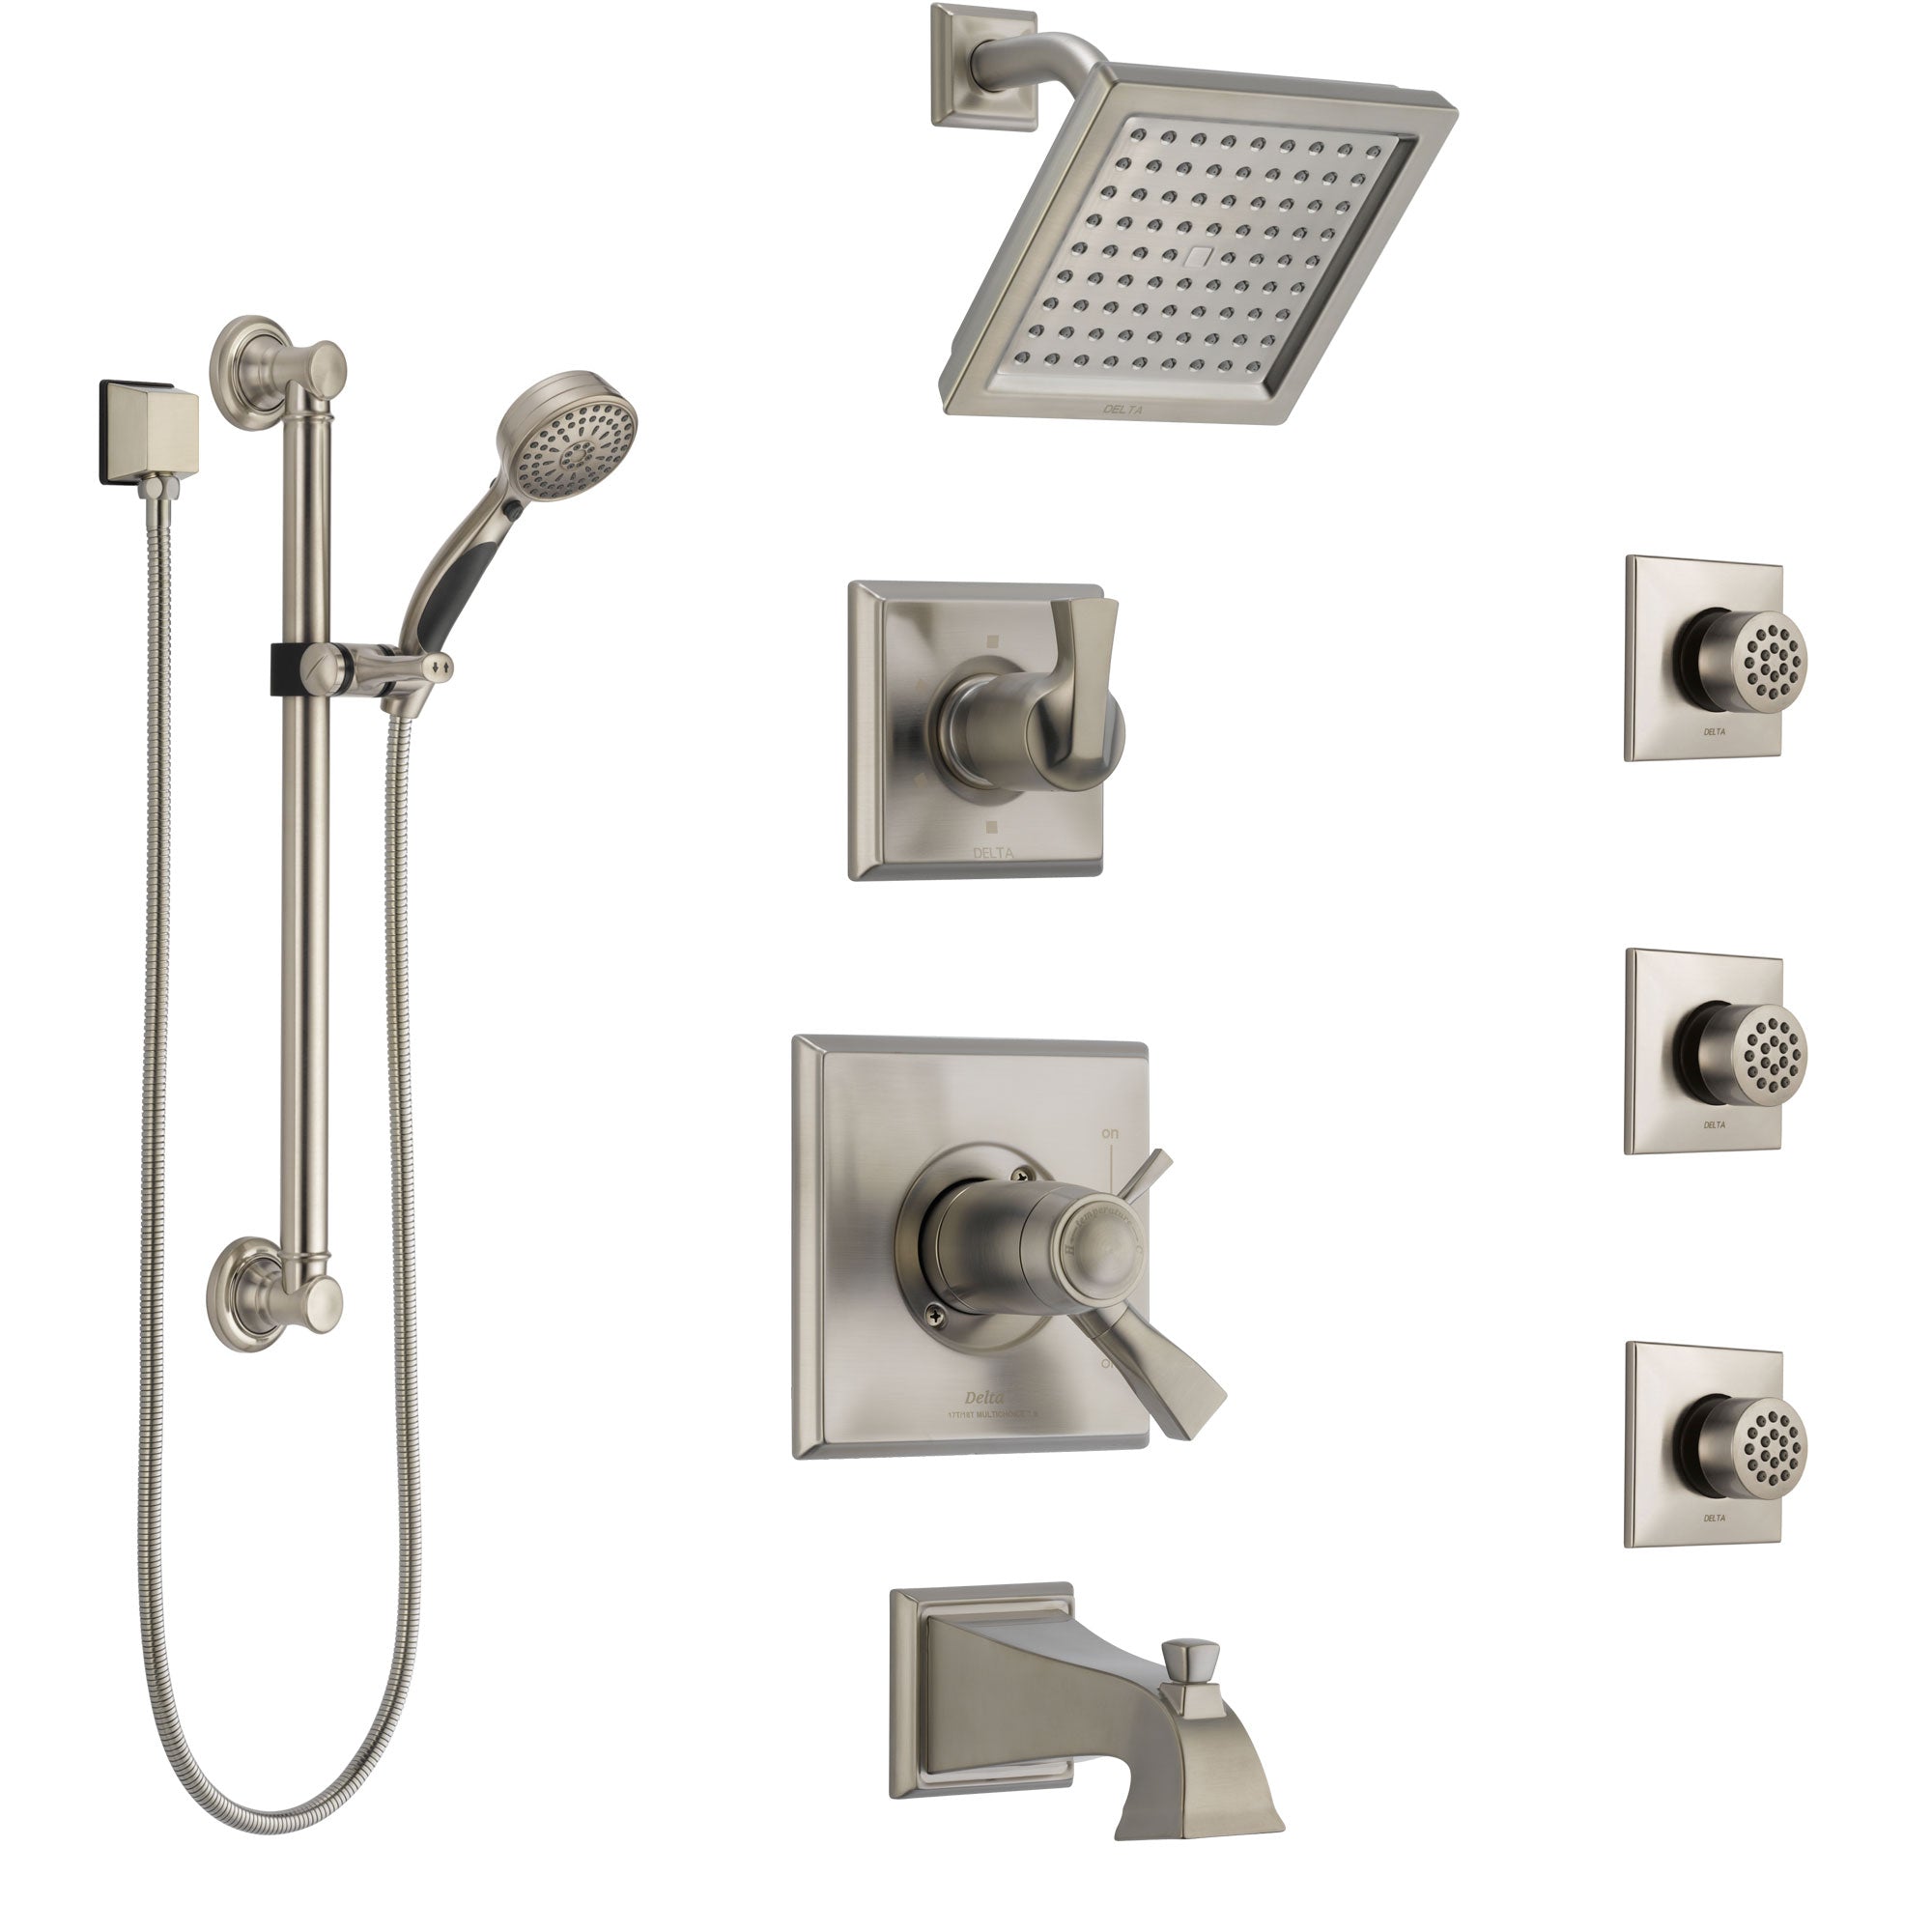 Delta Dryden Stainless Steel Finish Dual Thermostatic Control Tub and Shower System with Showerhead, 3 Body Jets, Grab Bar Hand Spray SS17T4512SS2